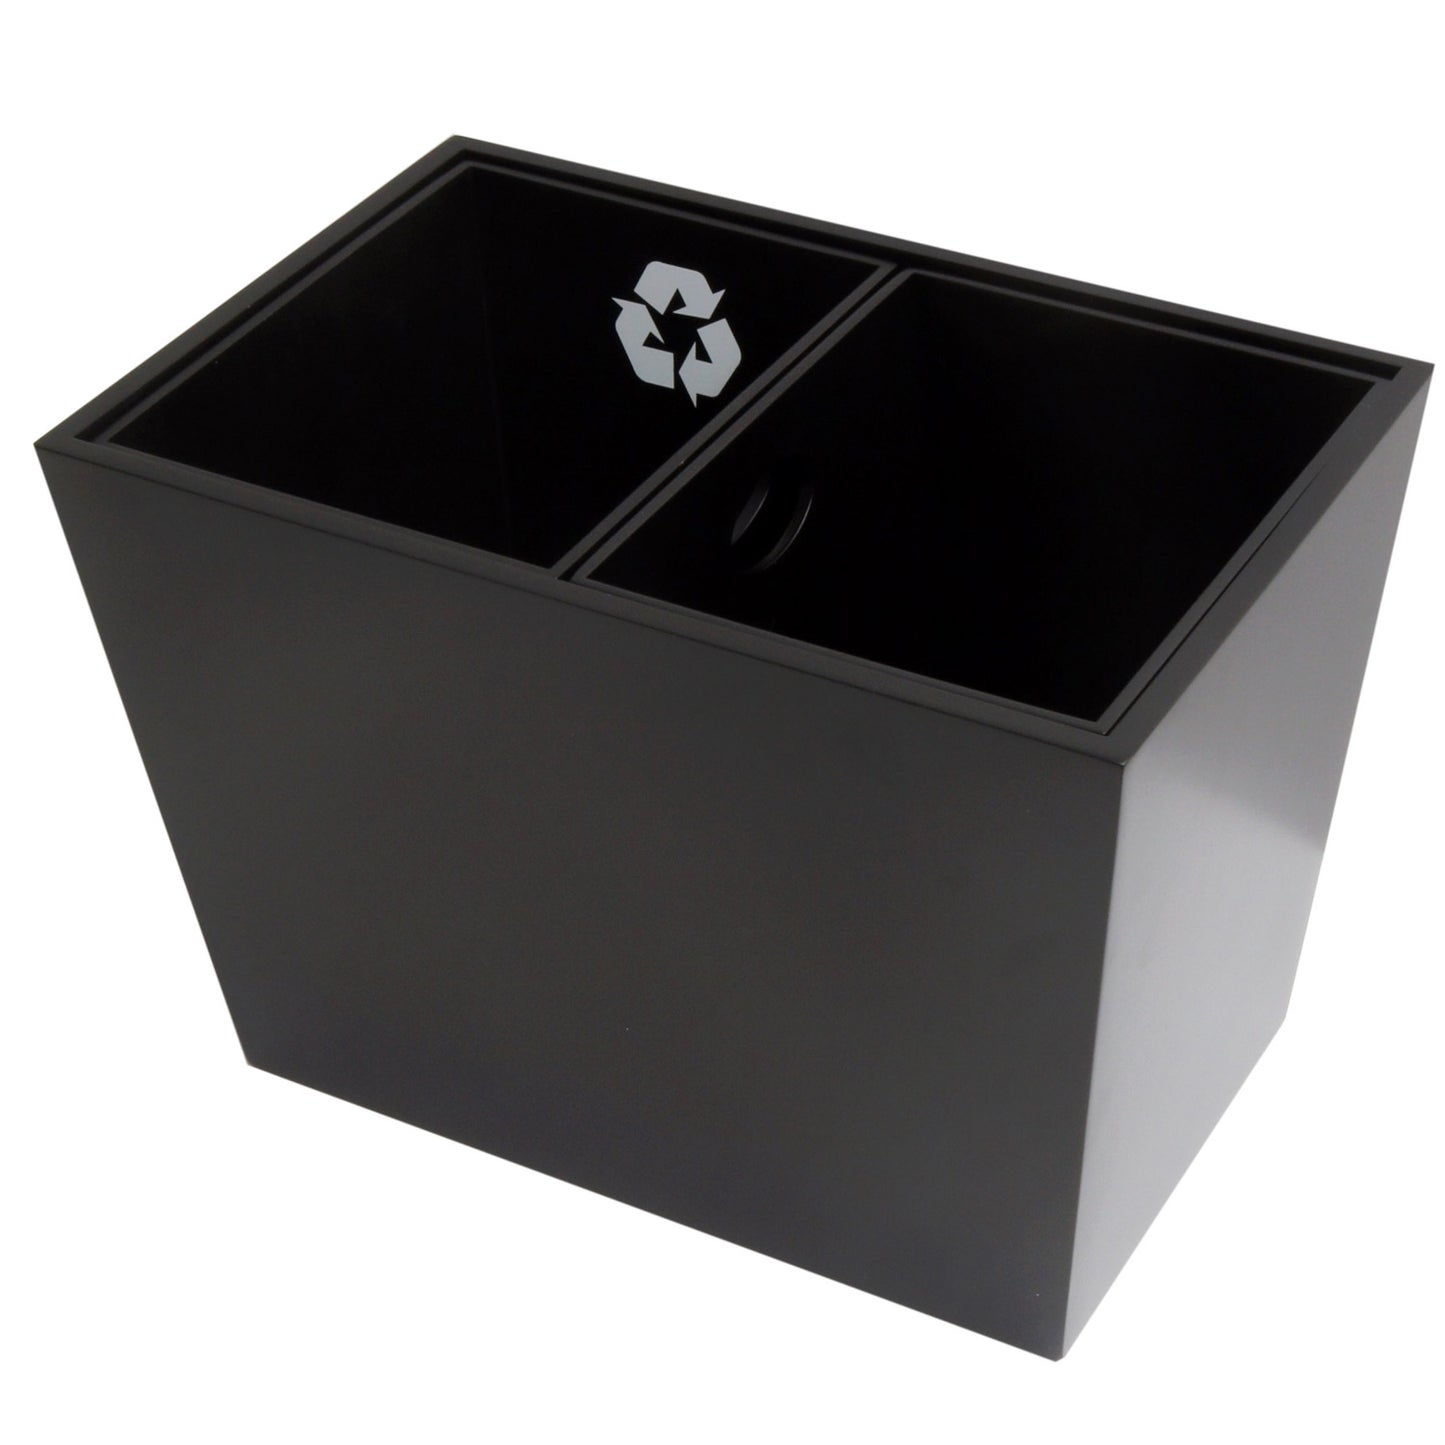 Dual Double Size Divided Recycle Bin with Removable Inner Bins